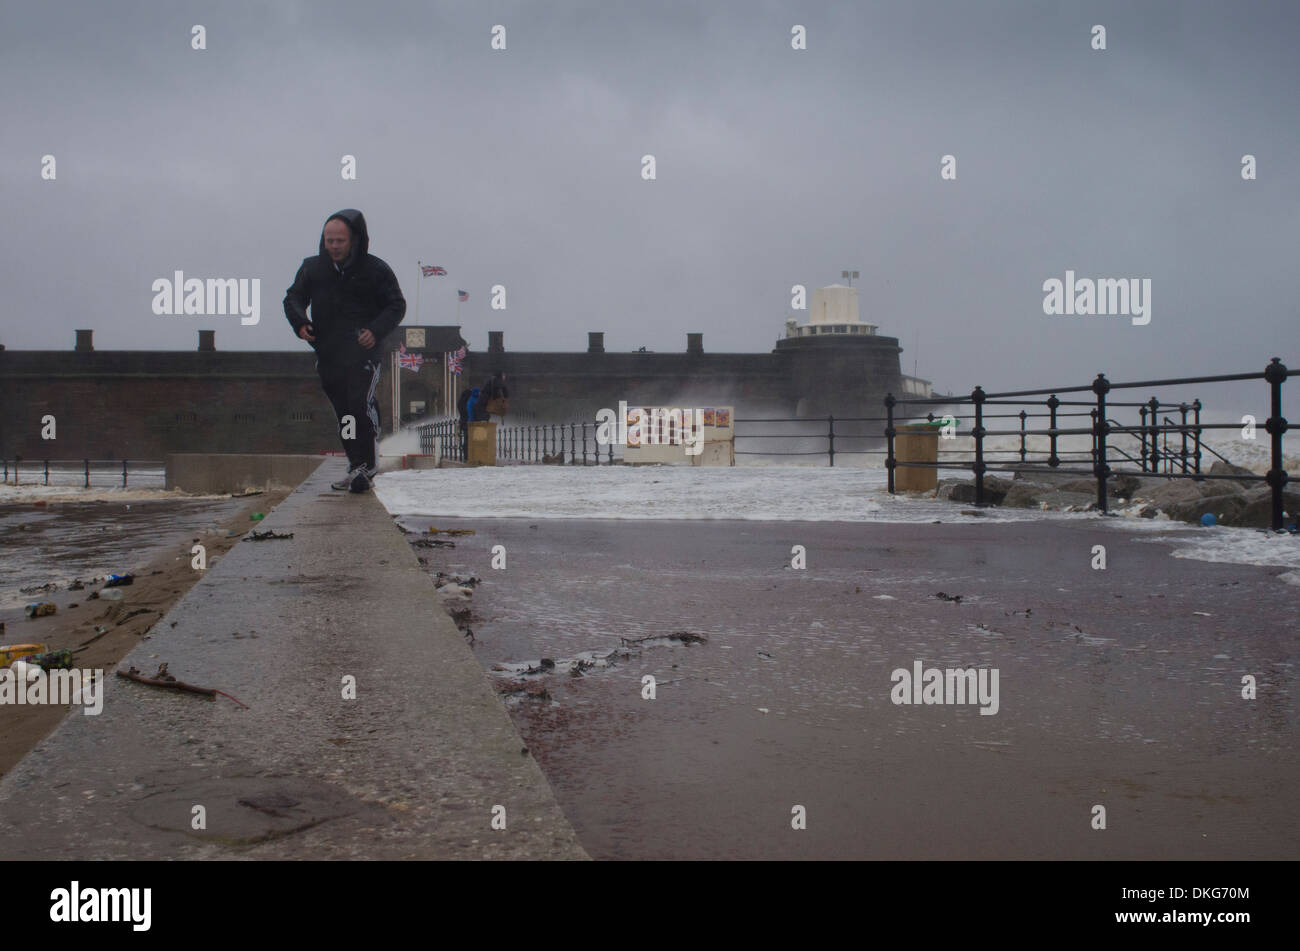 Man walking in storm at Fort Perch Rock in New Brighton, Wirral, Merseyside, United Kingdom Stock Photo